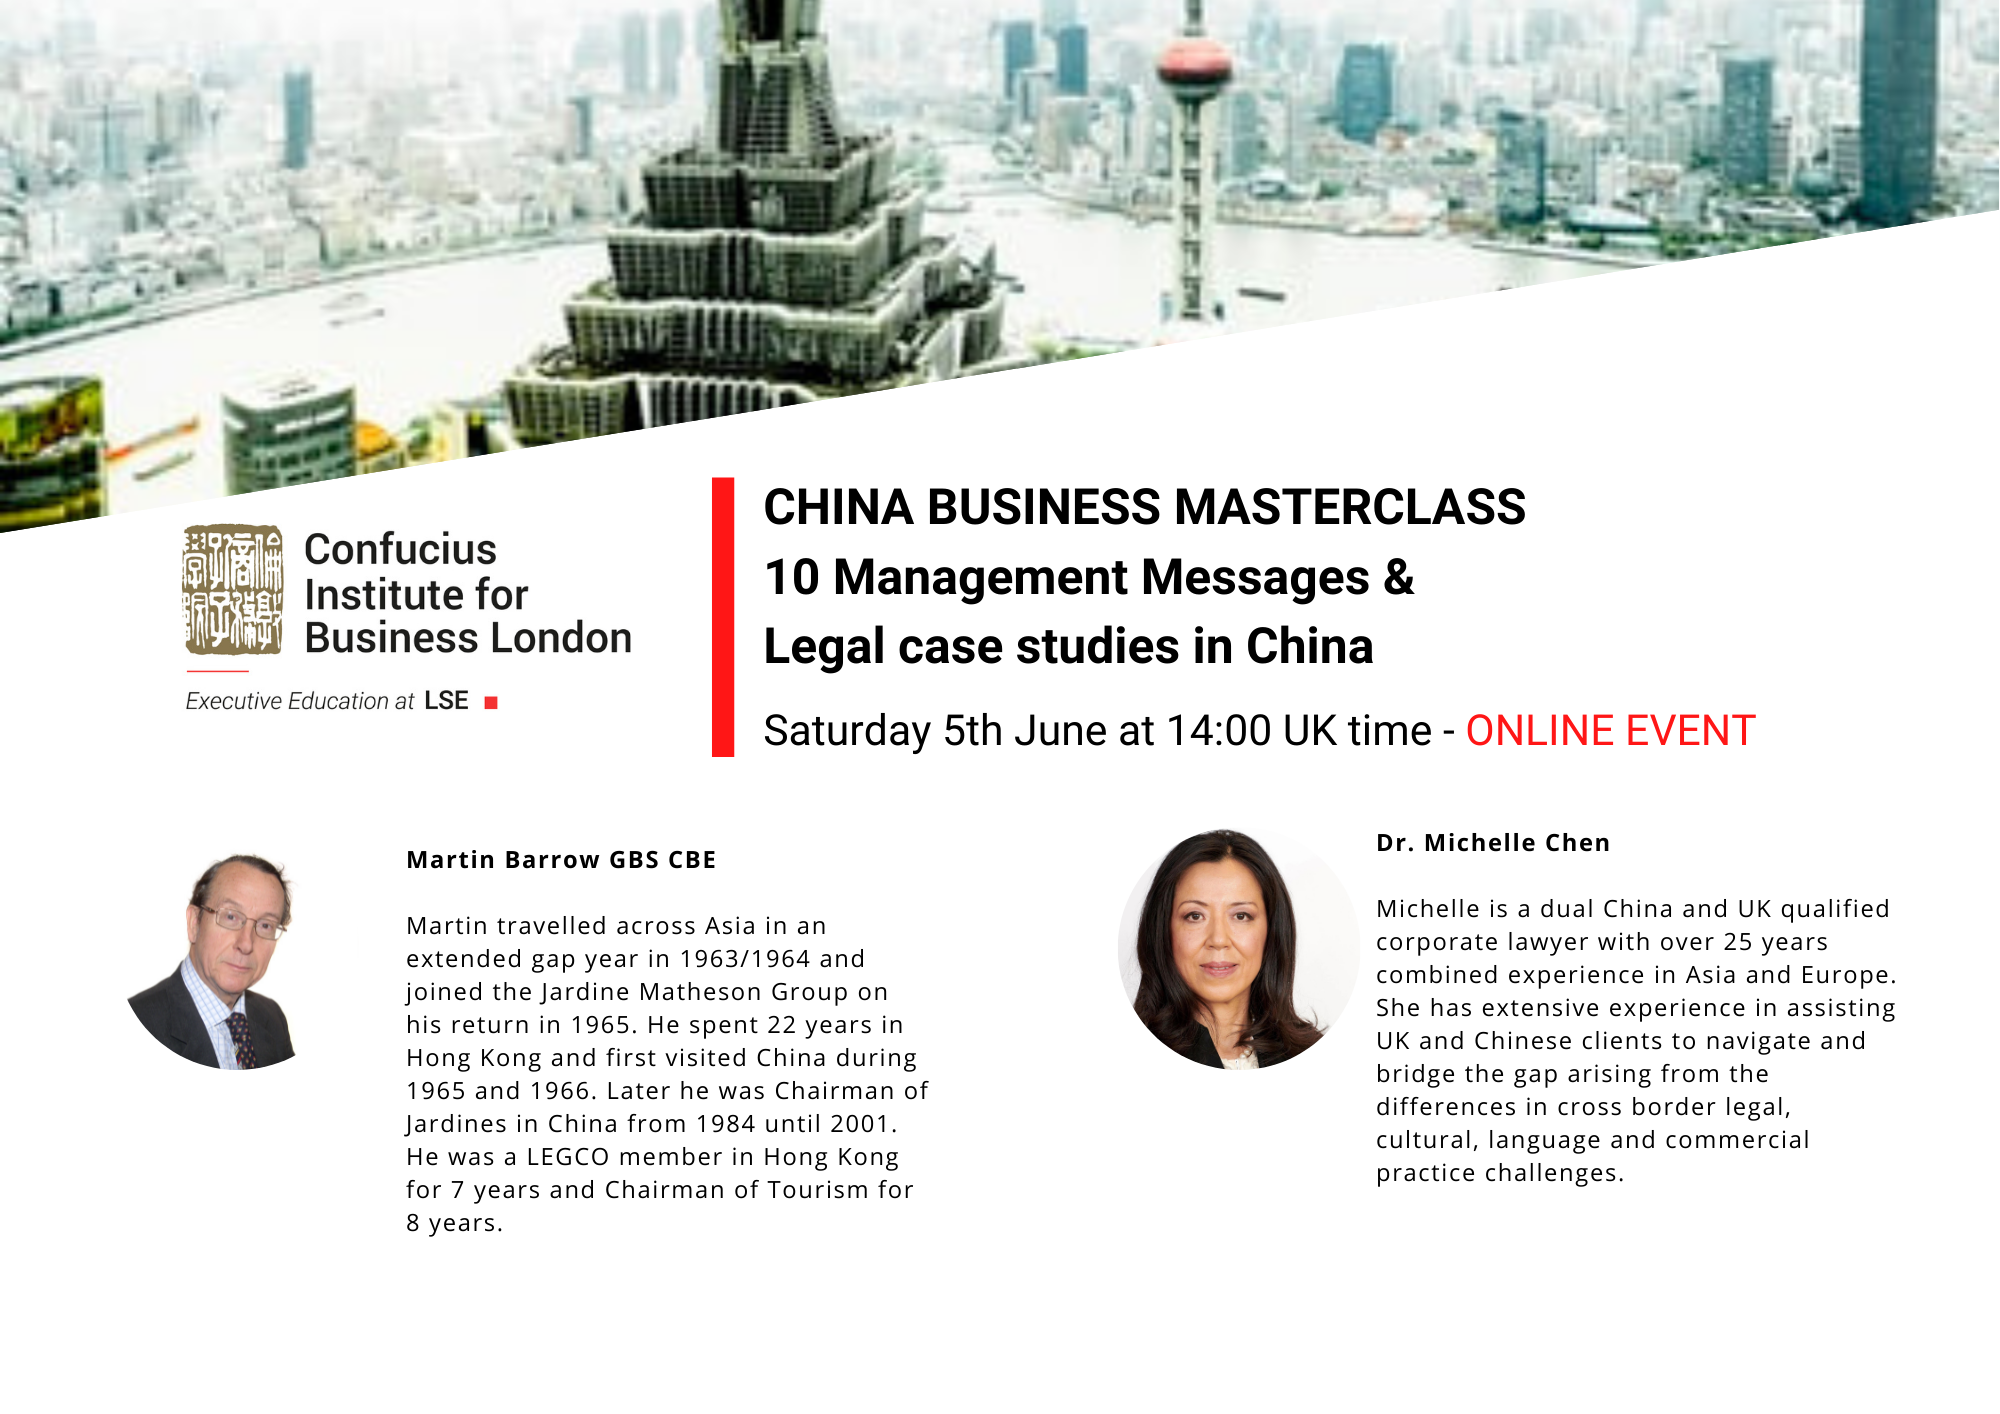 CHINA BUSINESS MASTERCLASS 10 Management Messages & Legal case studies in China